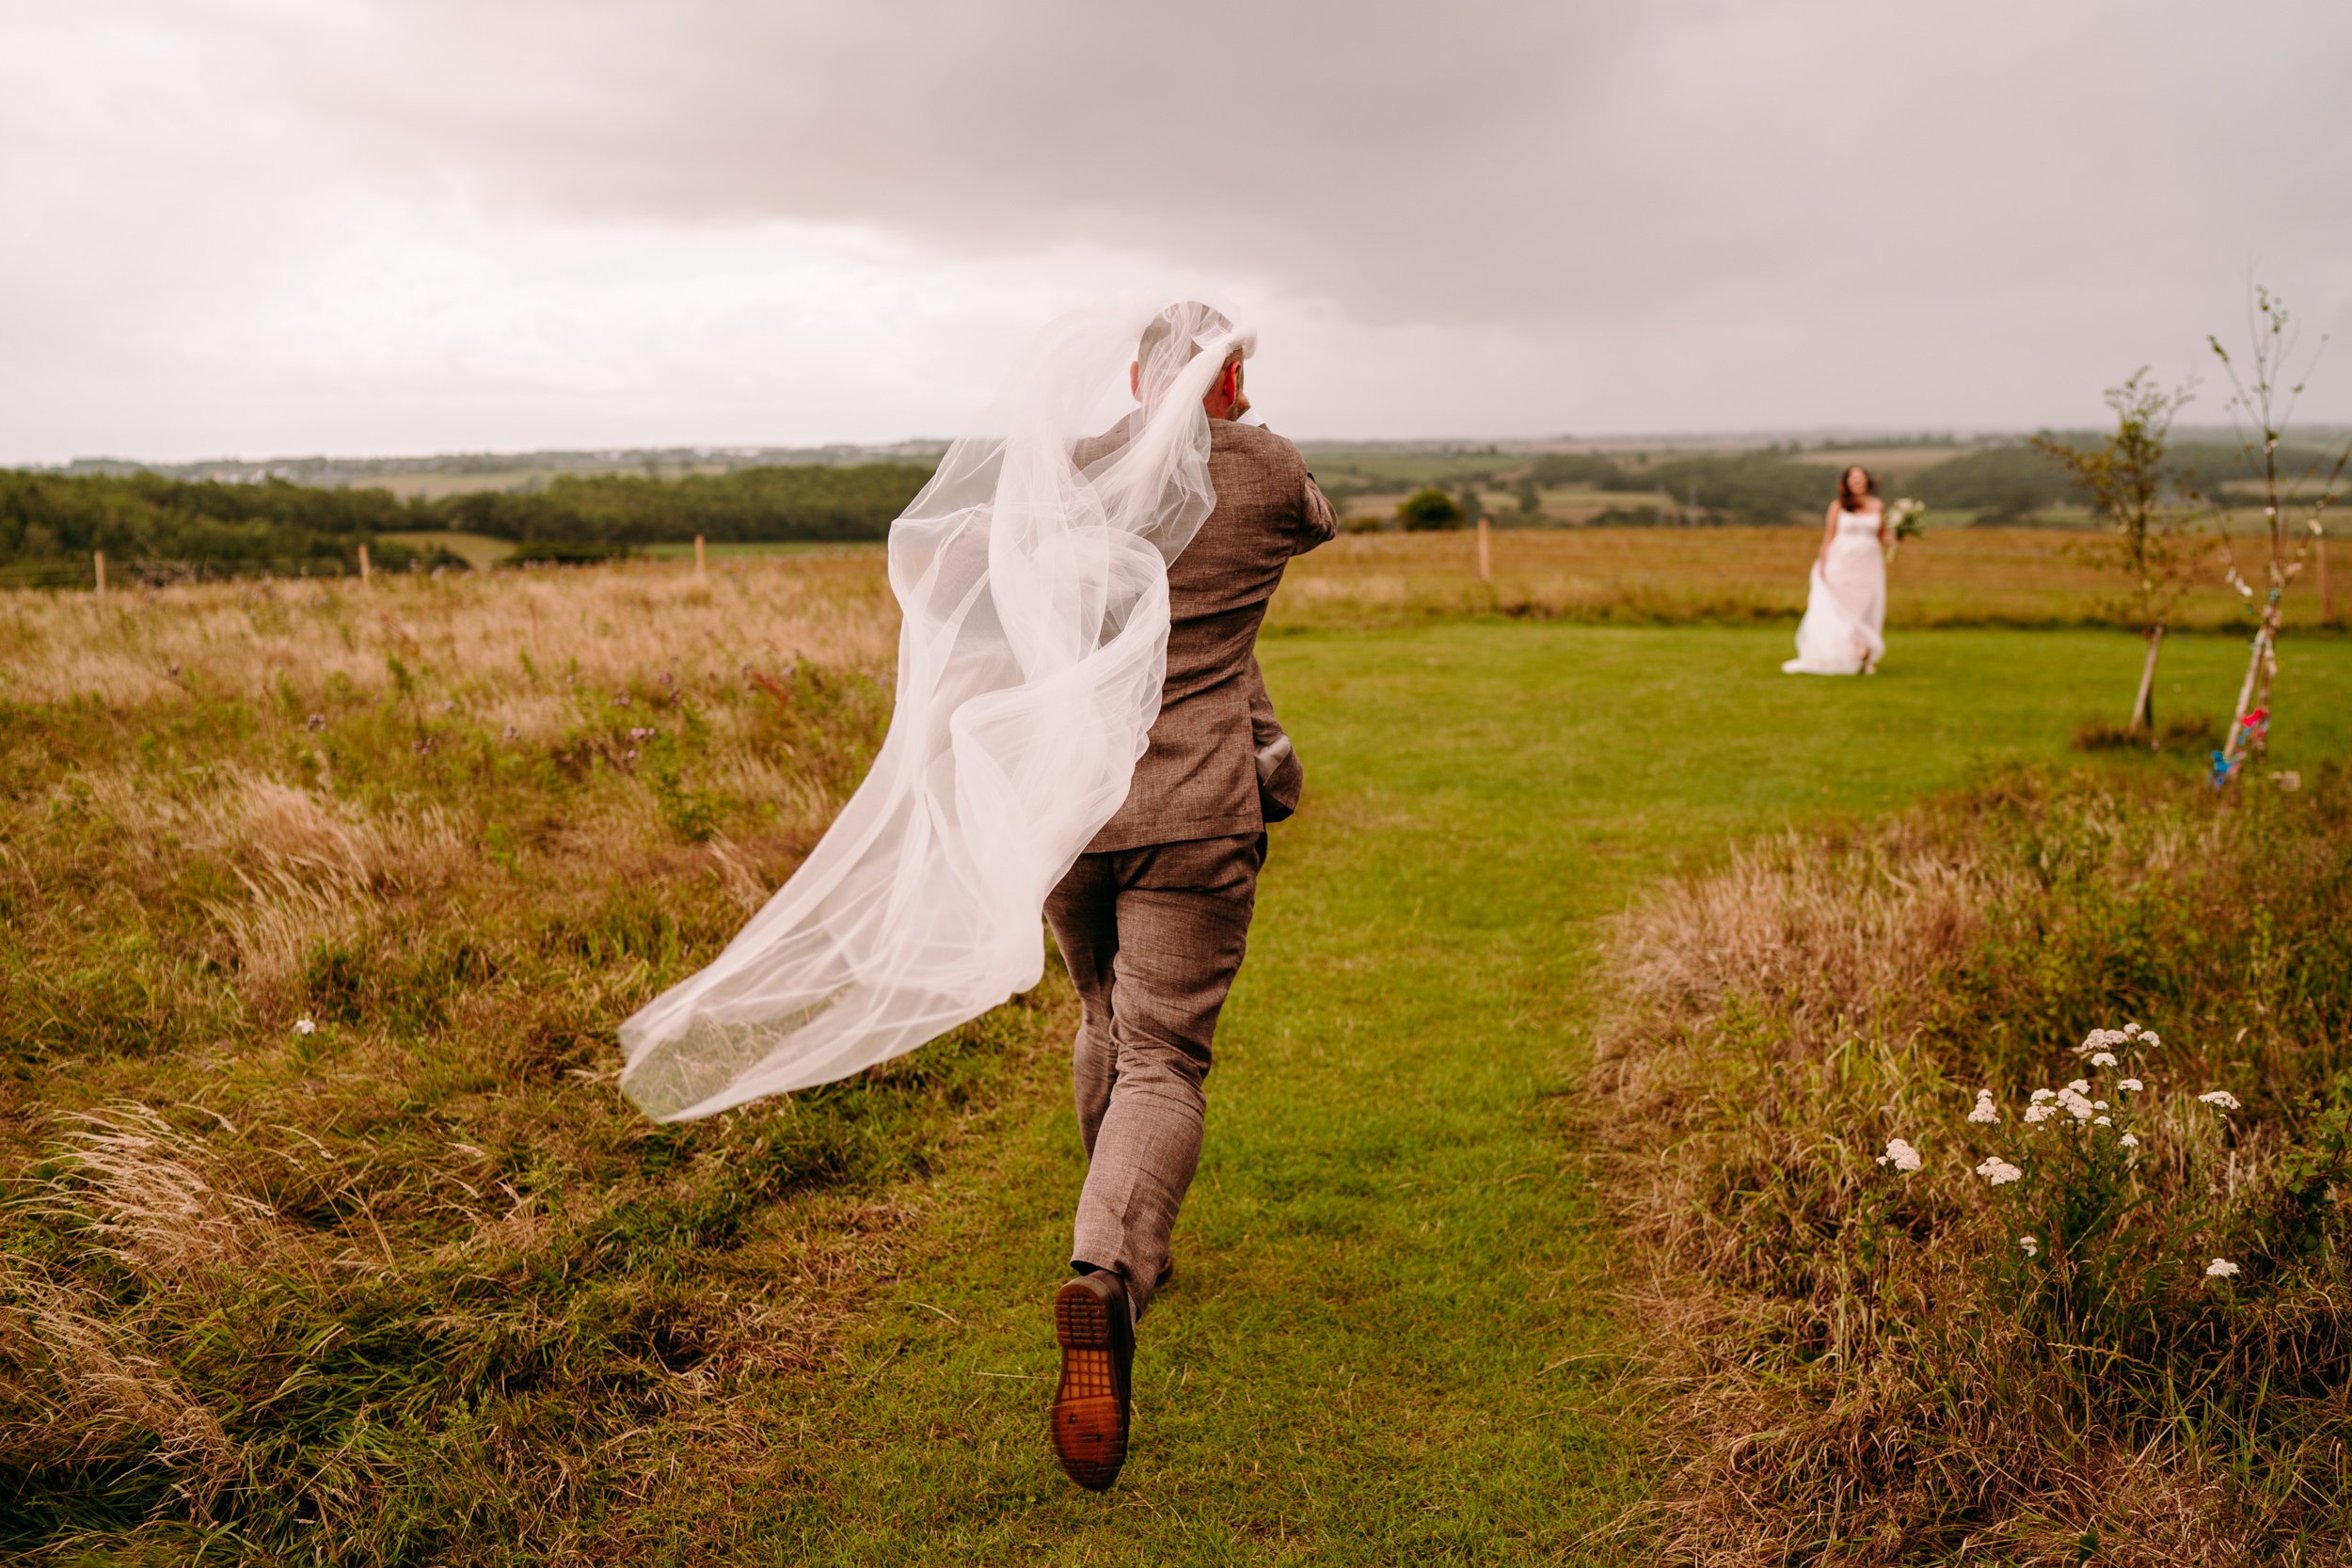  coed weddings cardiff natural fun relaxed photographers 